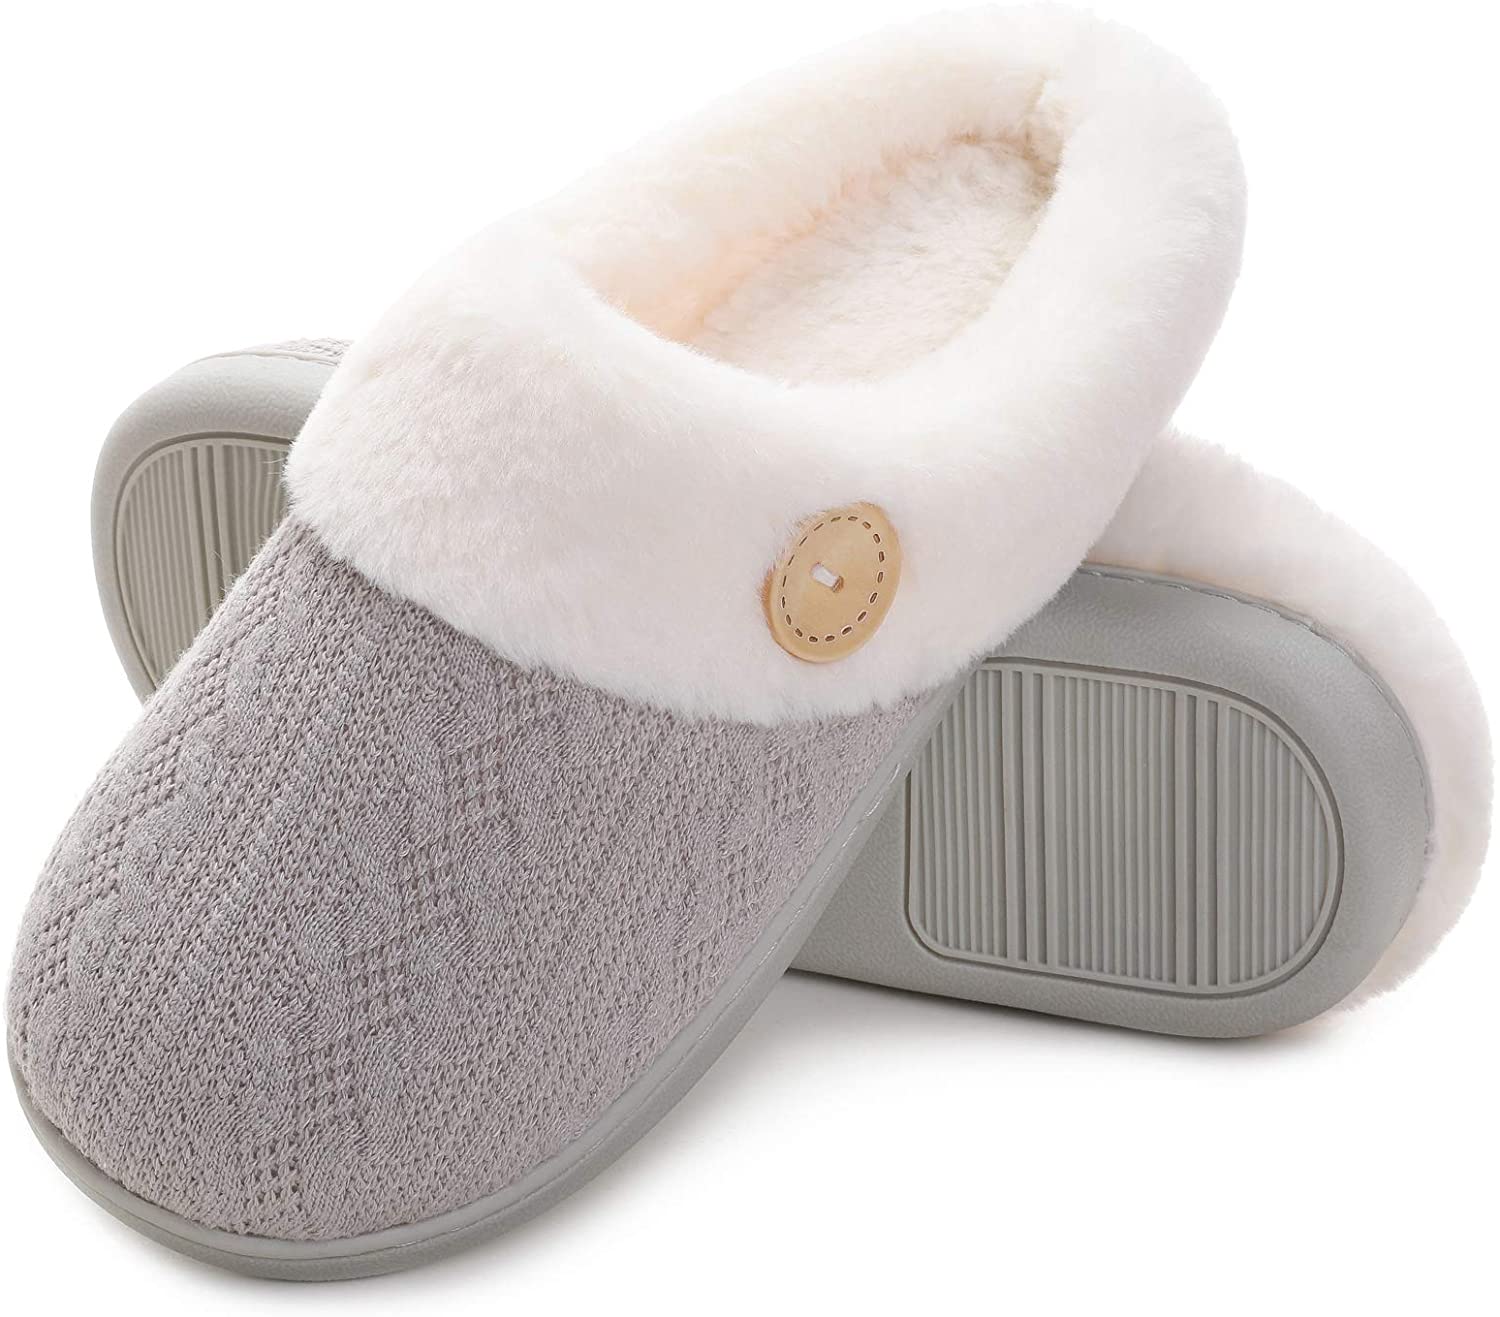 Ladies Slipper House Memory Foam Slippers Comfort and Warm Slippers for Mens and Womens Indoor Outdoor Non-Slip Plush Slippers